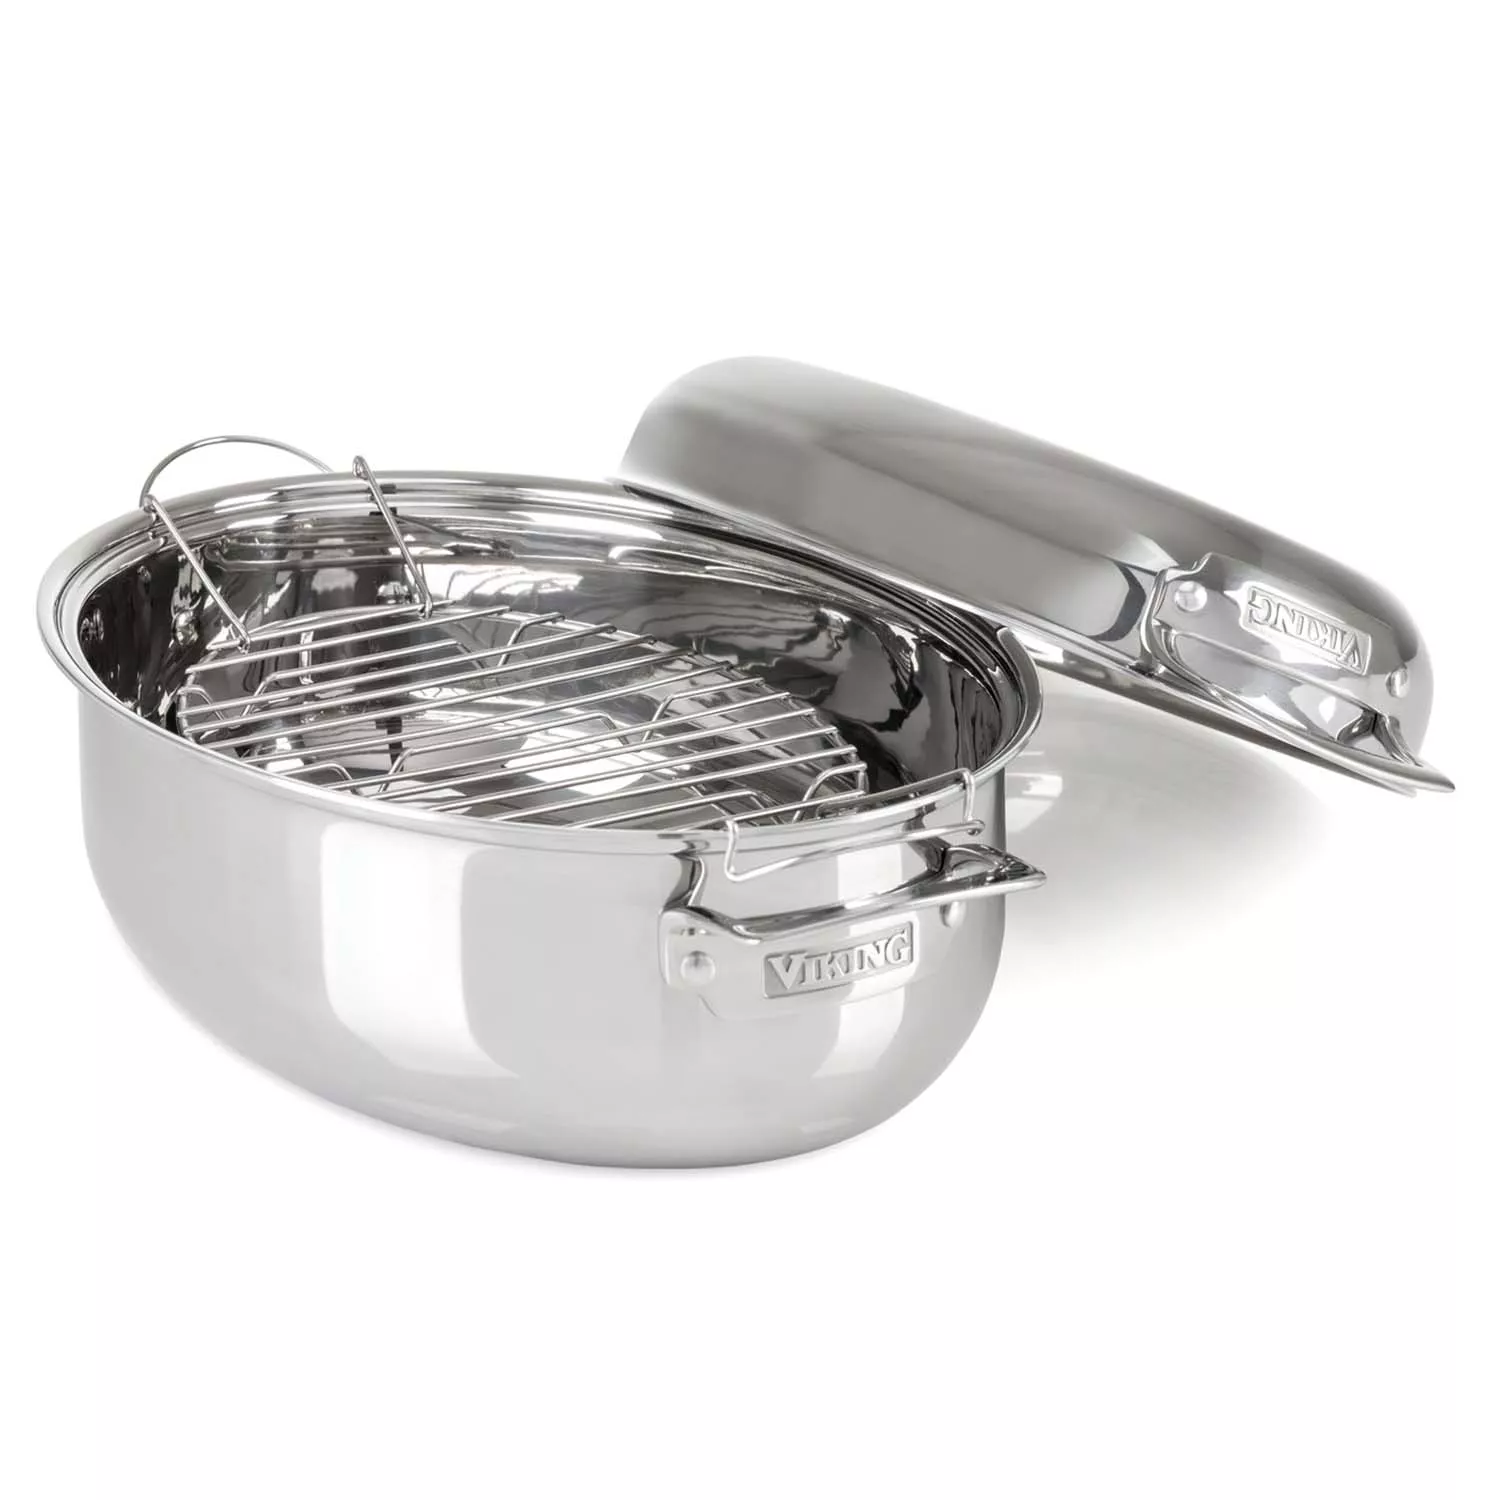 All-Clad Stainless Steel 15” Oval Baker with Pot Holders